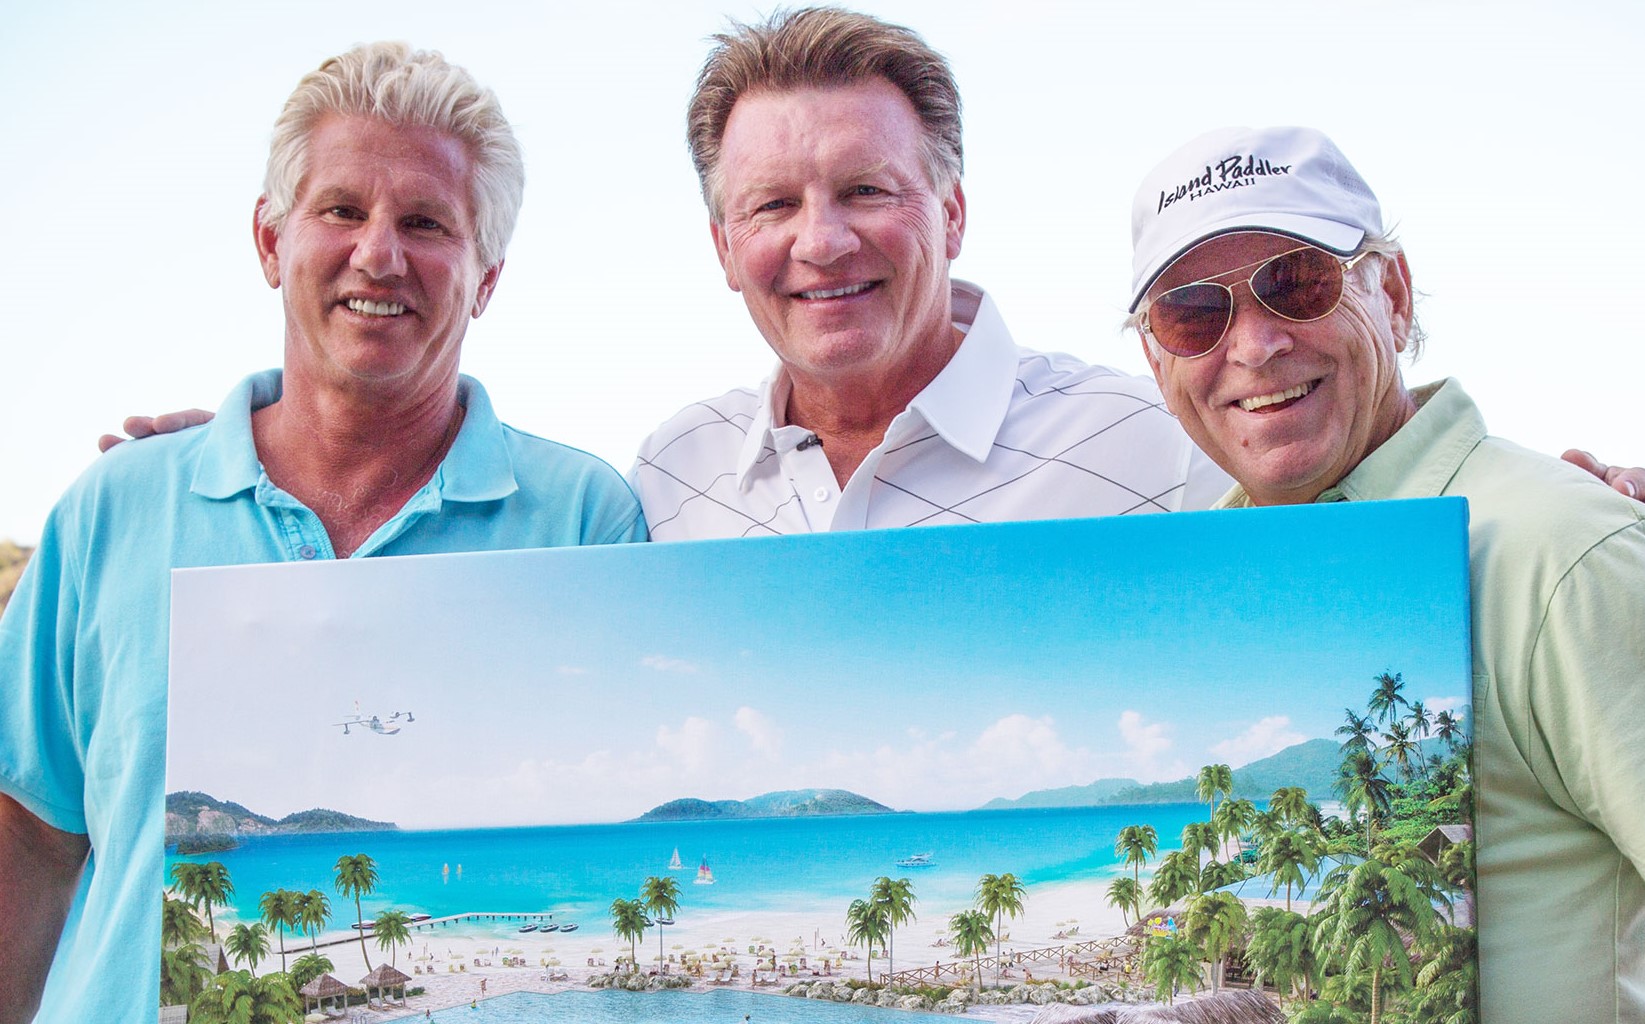 Jimmy Buffett Owns Margaritaville Resort In St. Thomas, But Sails To The Defense of Regatta in Ritzy St. Barts